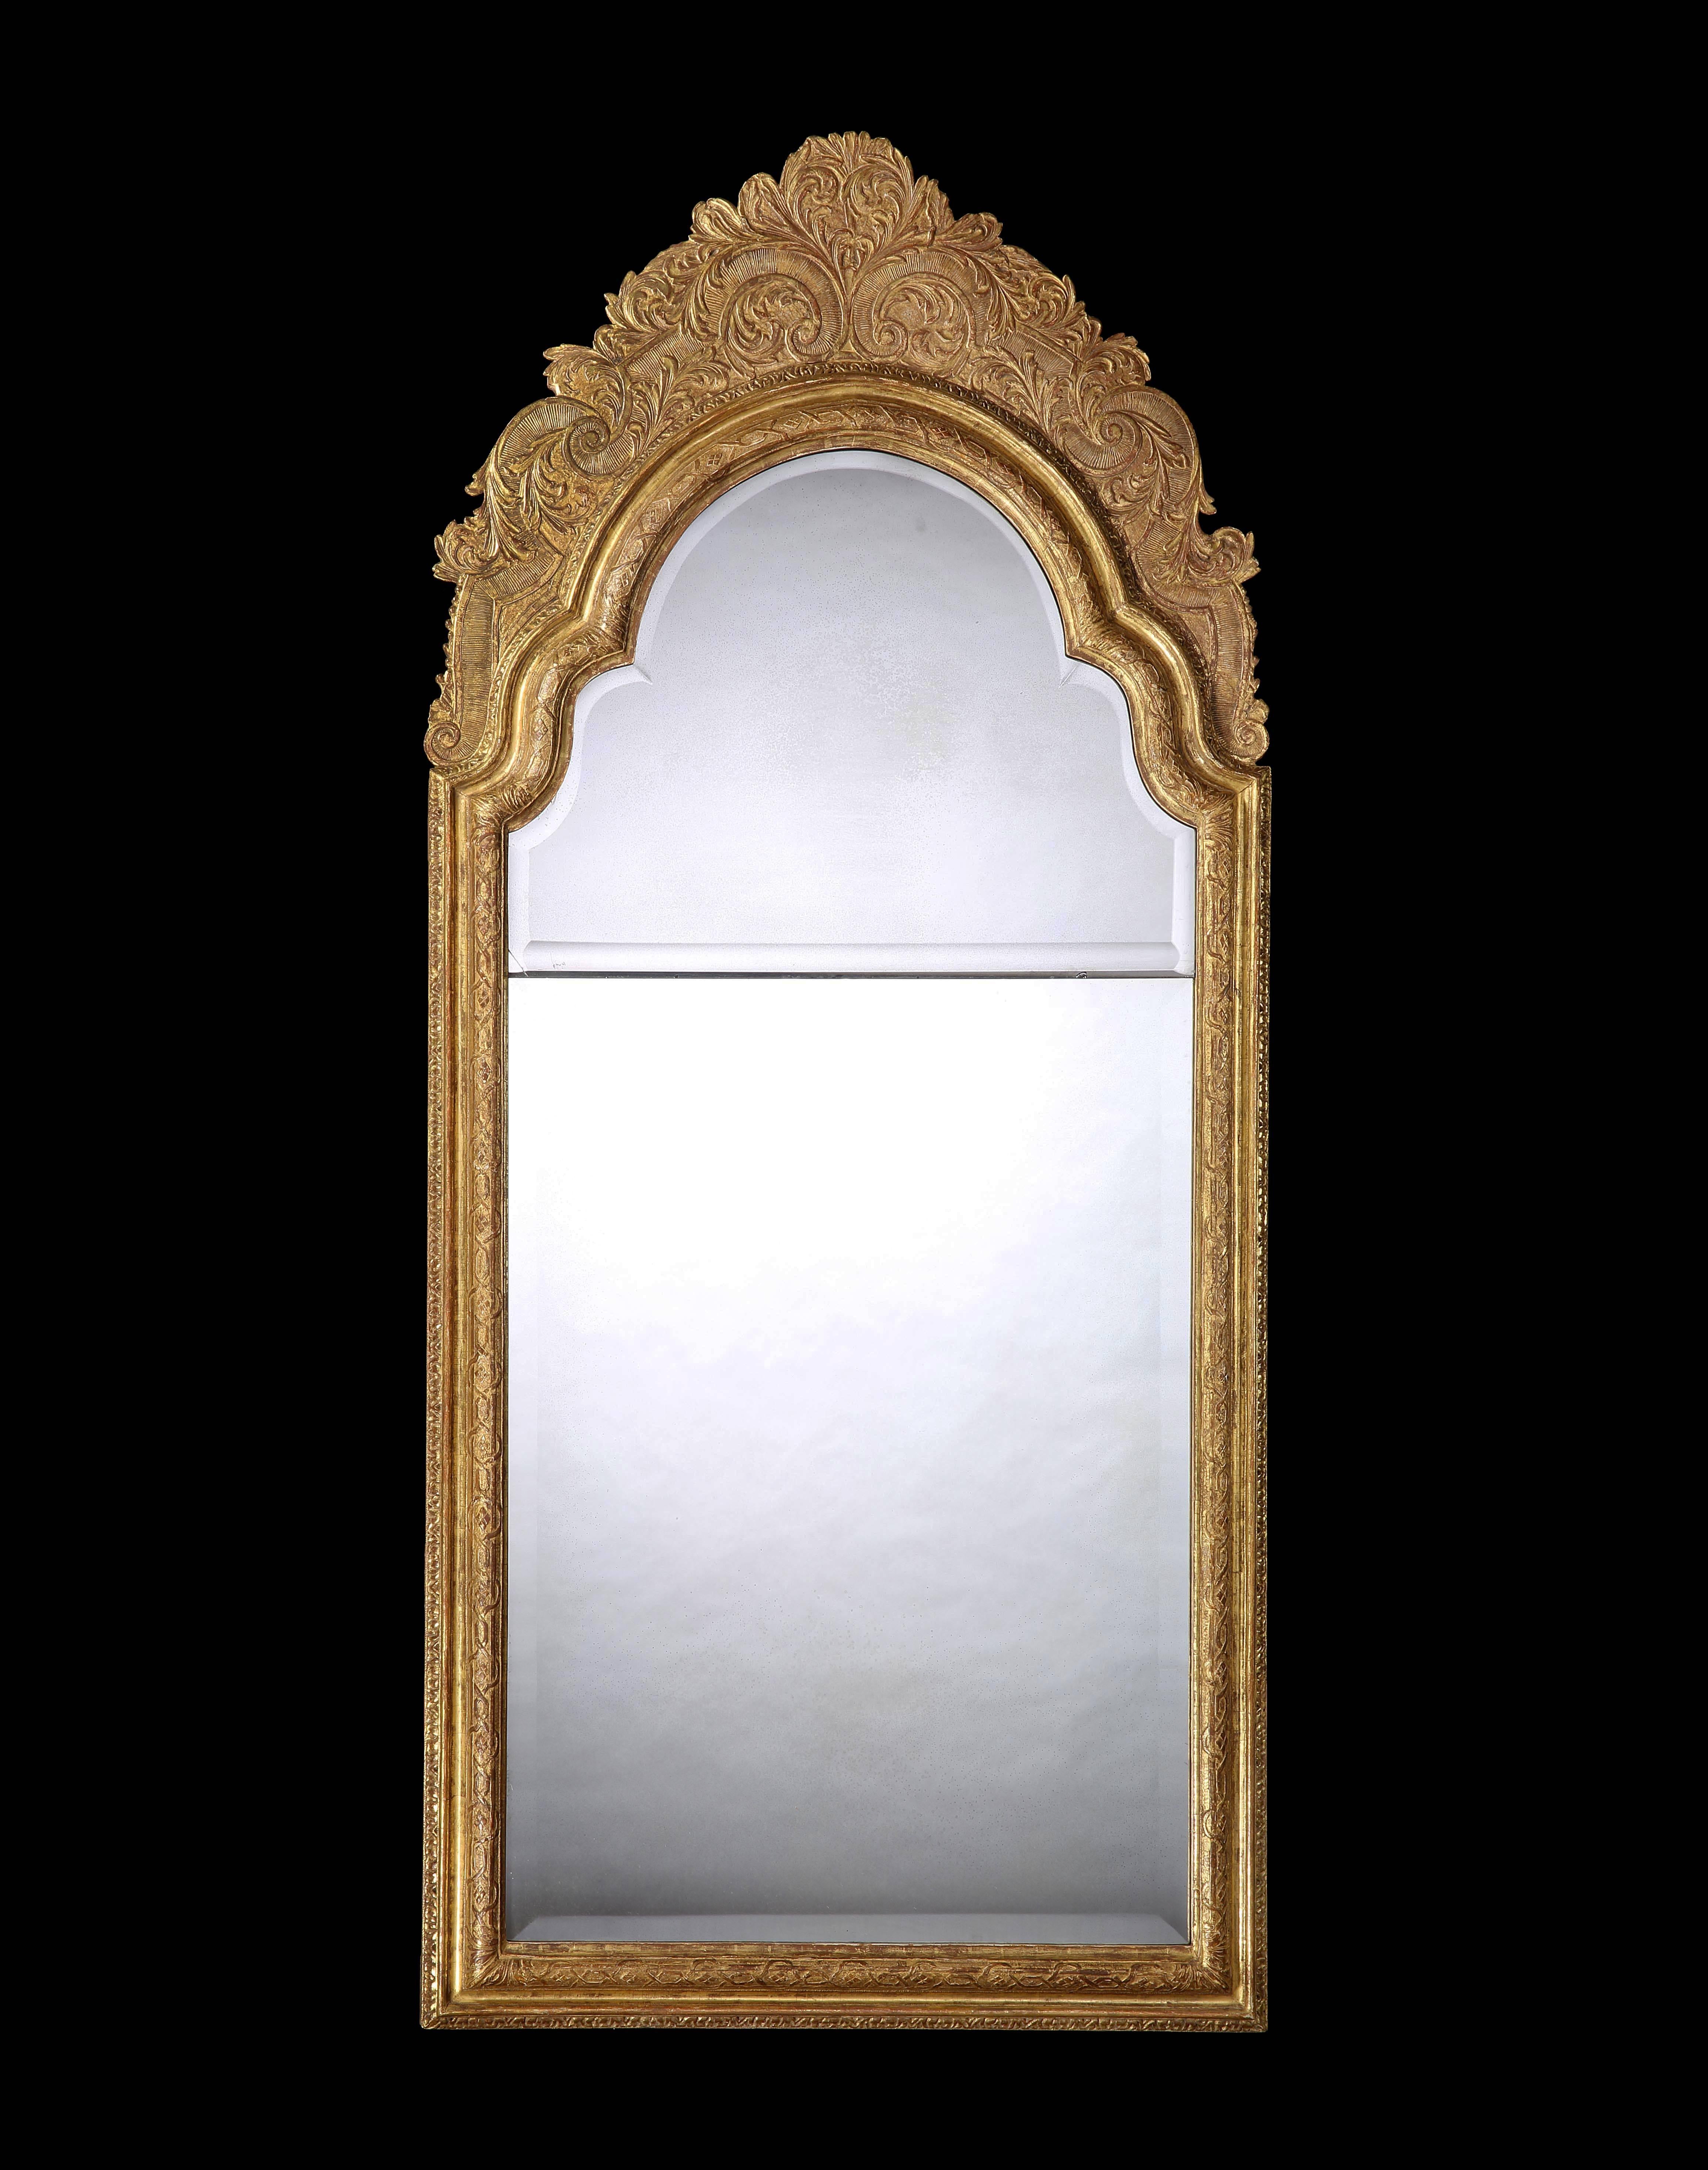 A rare large sized Queen Anne pier glass mirror, retaining the original re silvered bevelled top plate and with a later lower bevelled plate, the carved moulded frame depicting acanthus, floral garlands and a hatched pattern.
 
English, circa